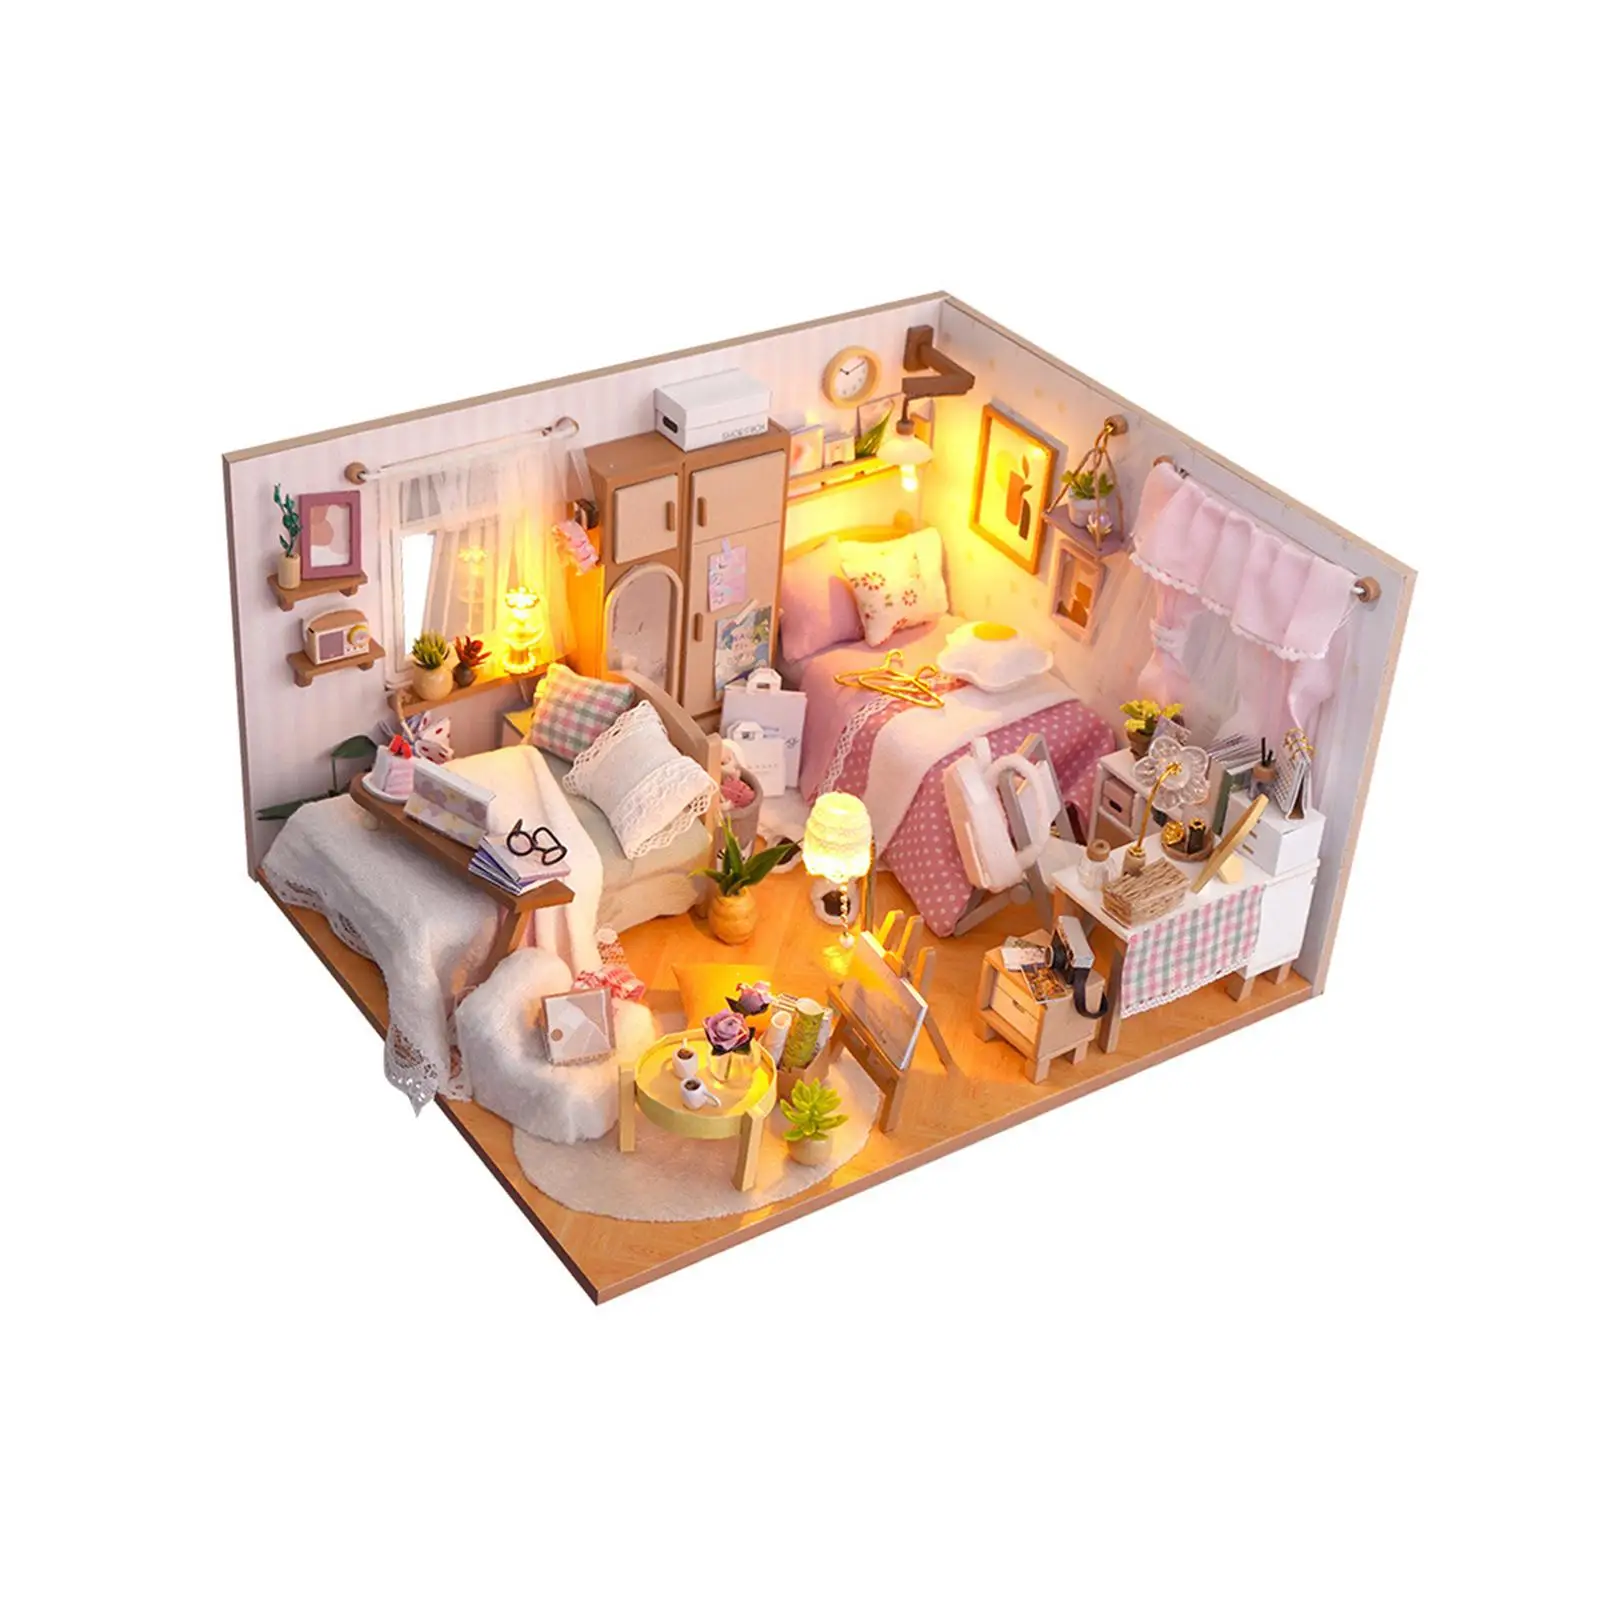 3D Wooden Miniature Dollhouse Kits Educational Toy Modern with Furniture Collectibles Artwork Creative Bedroom Doll House Model